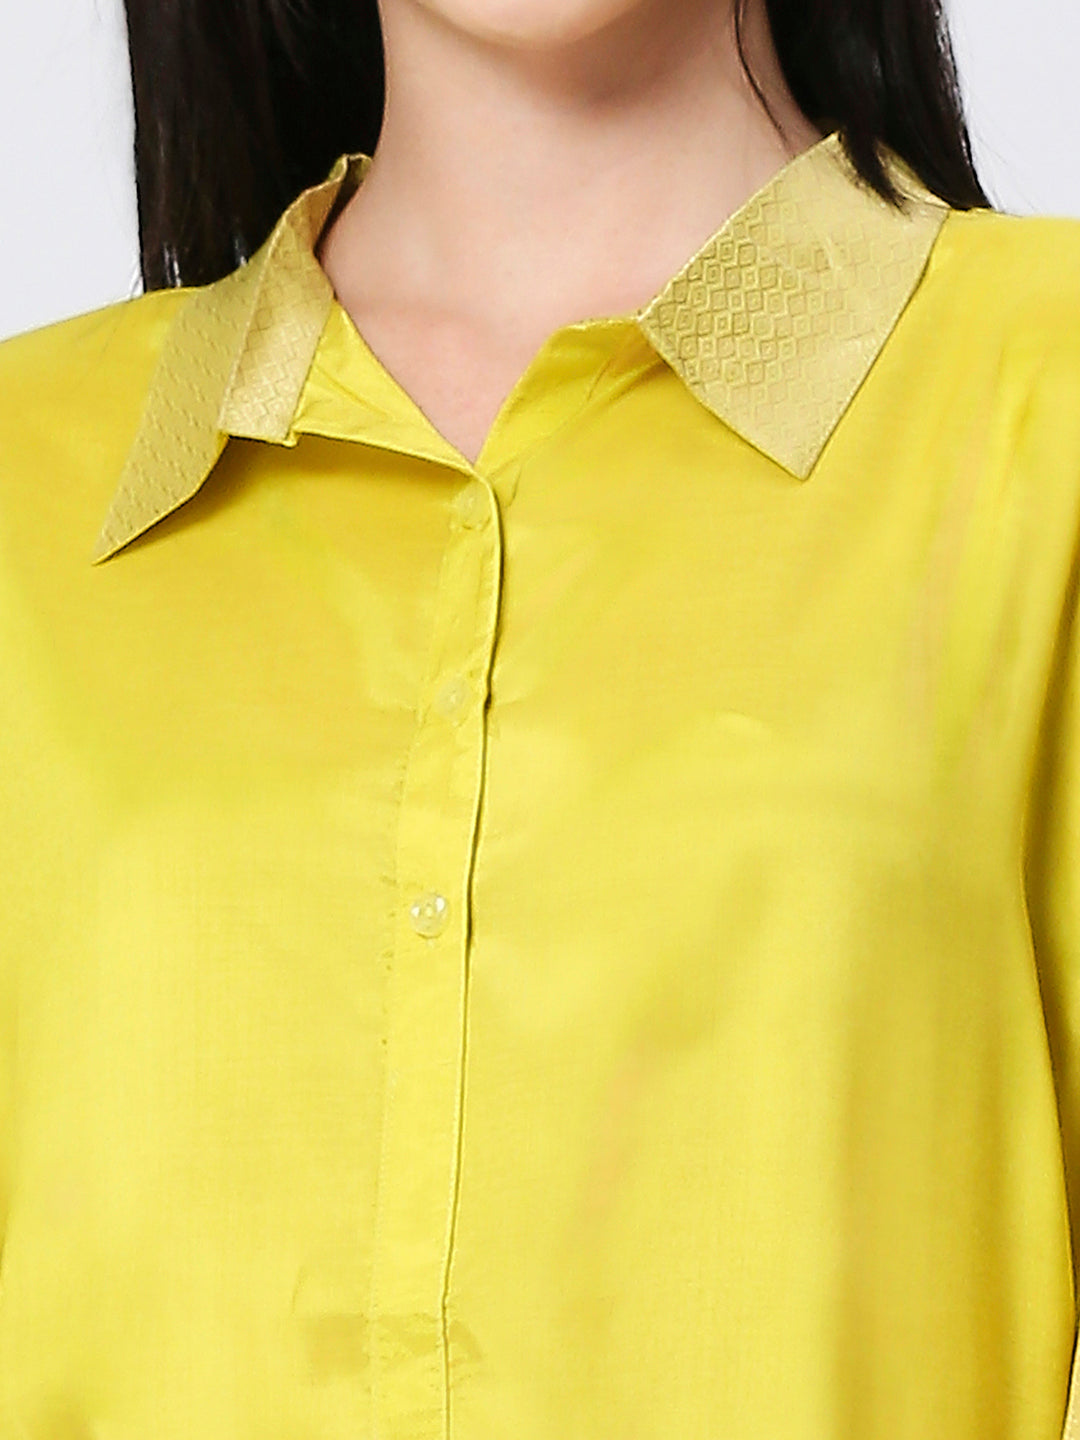 Lime Gold Solid Viscose Top with Brocade Trims & Pant